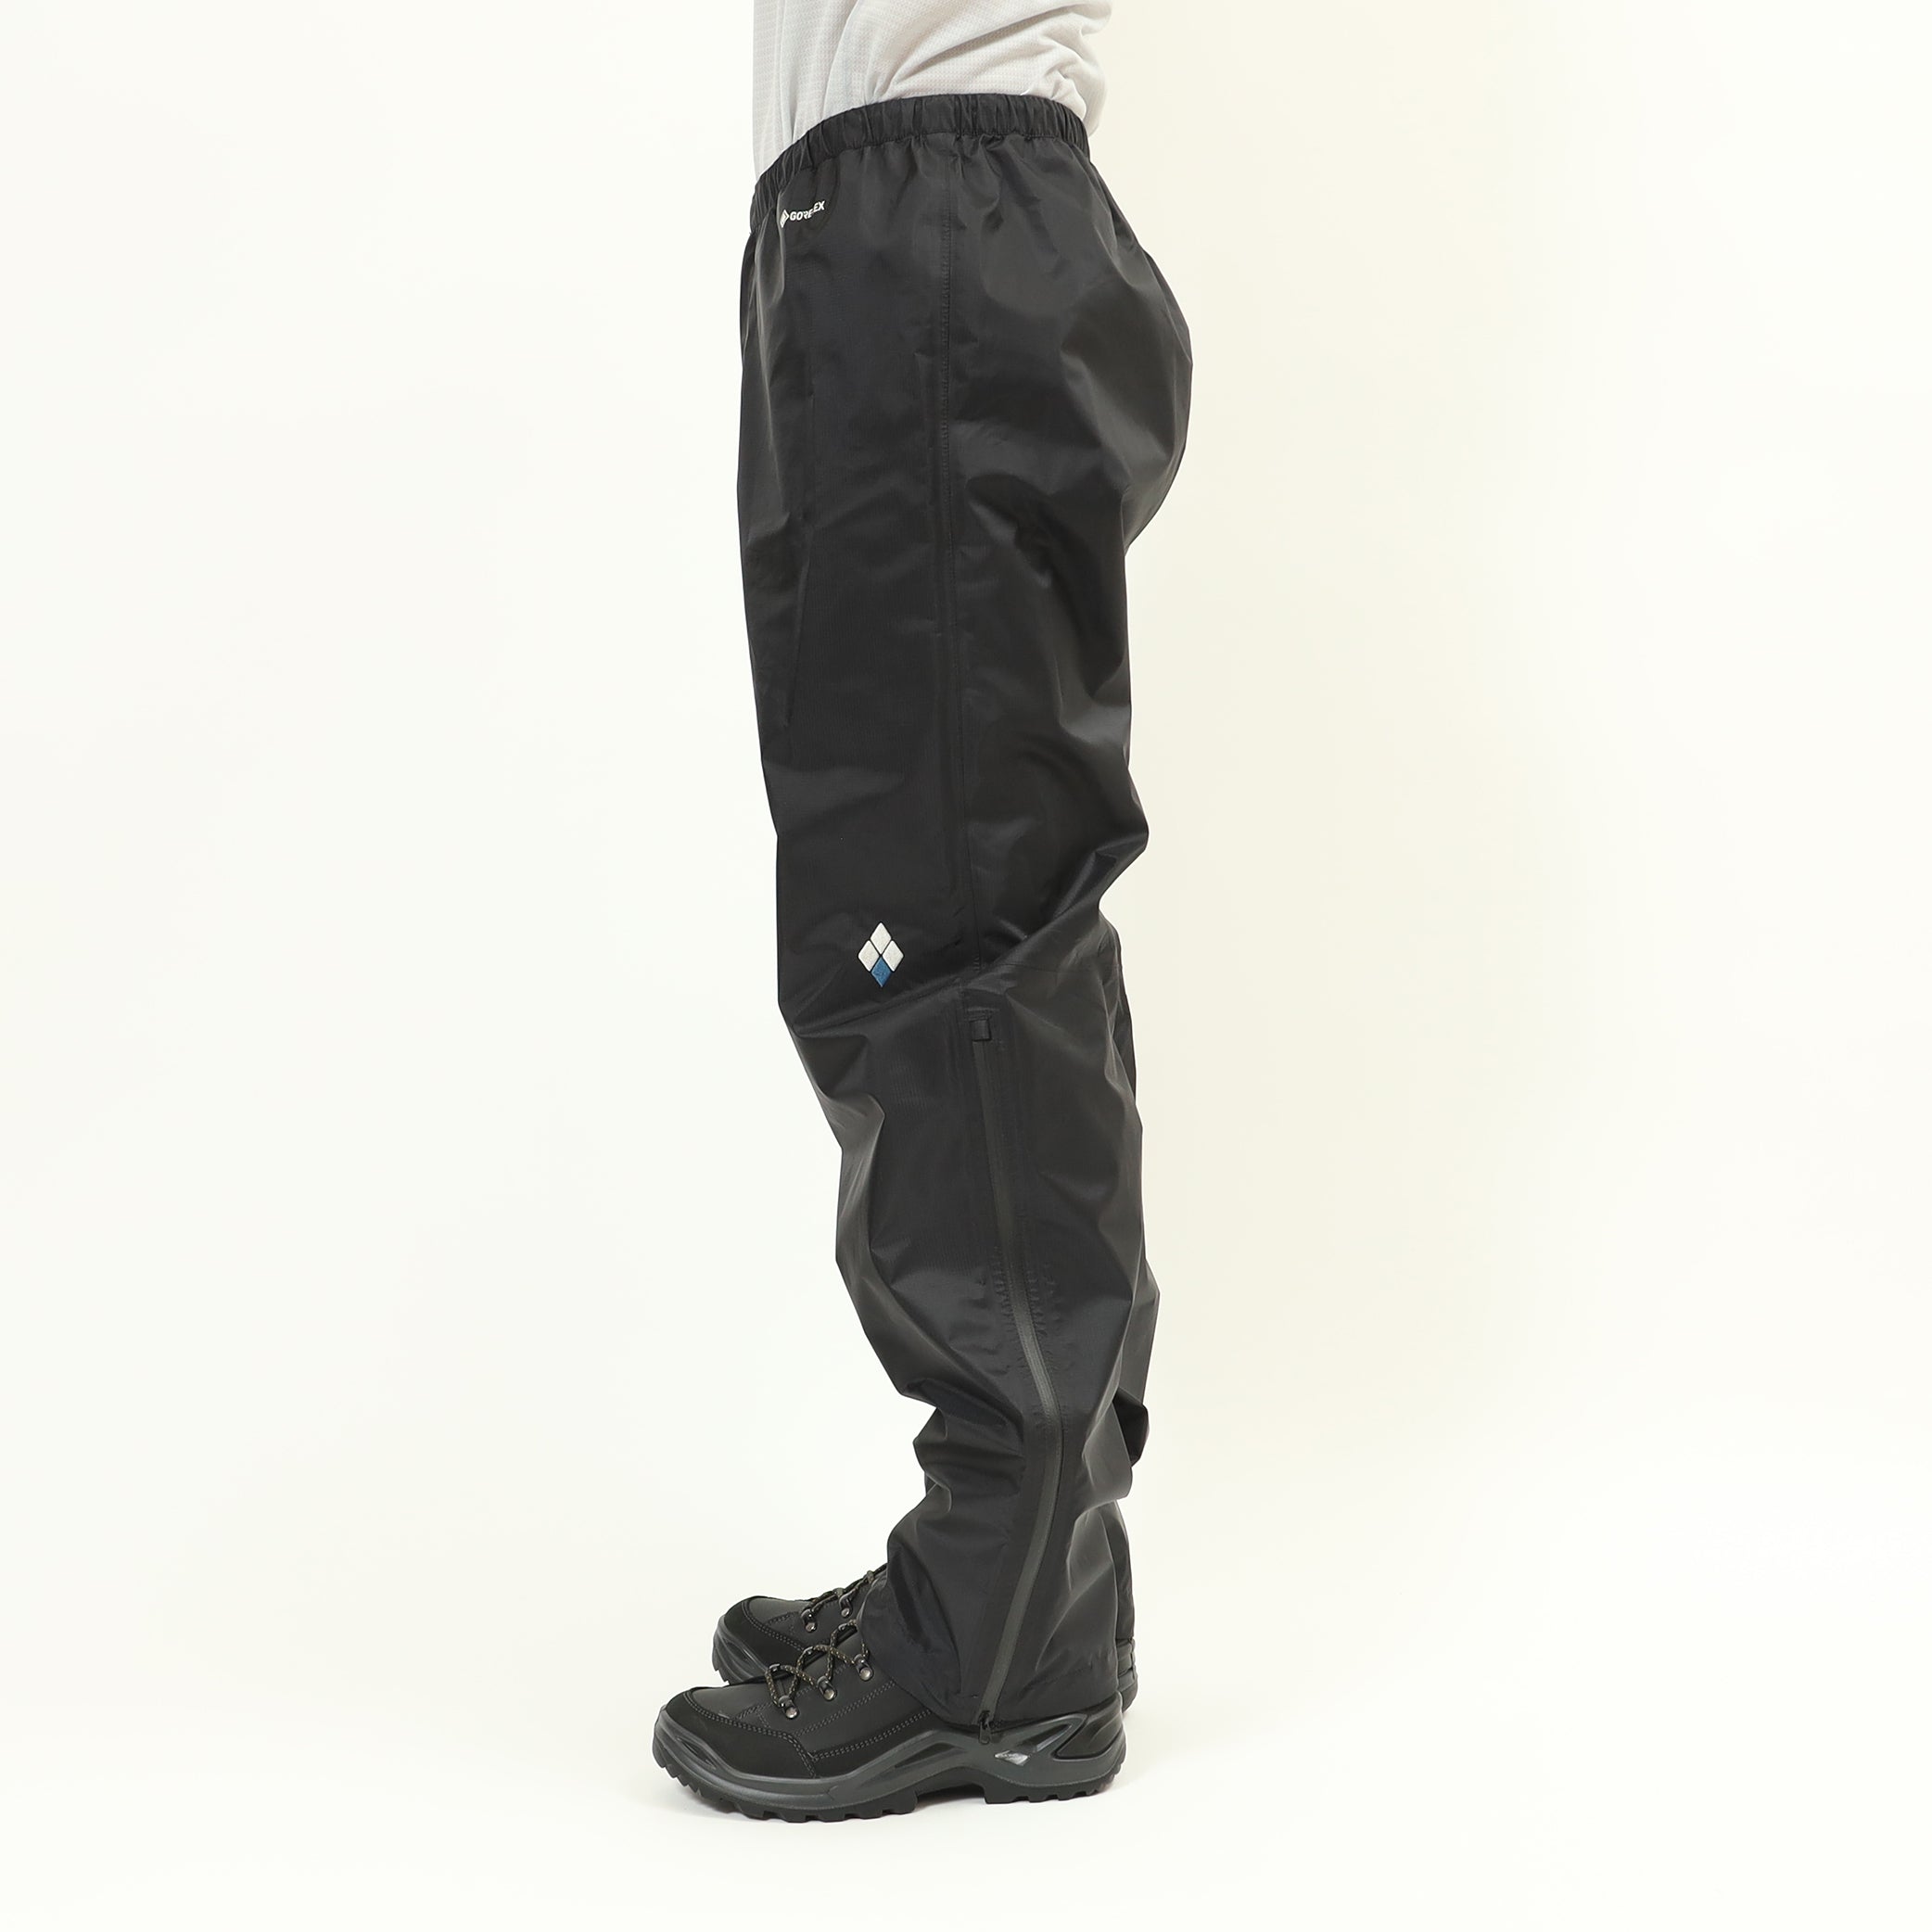 montbell GORE-TEX strom cruiser pants